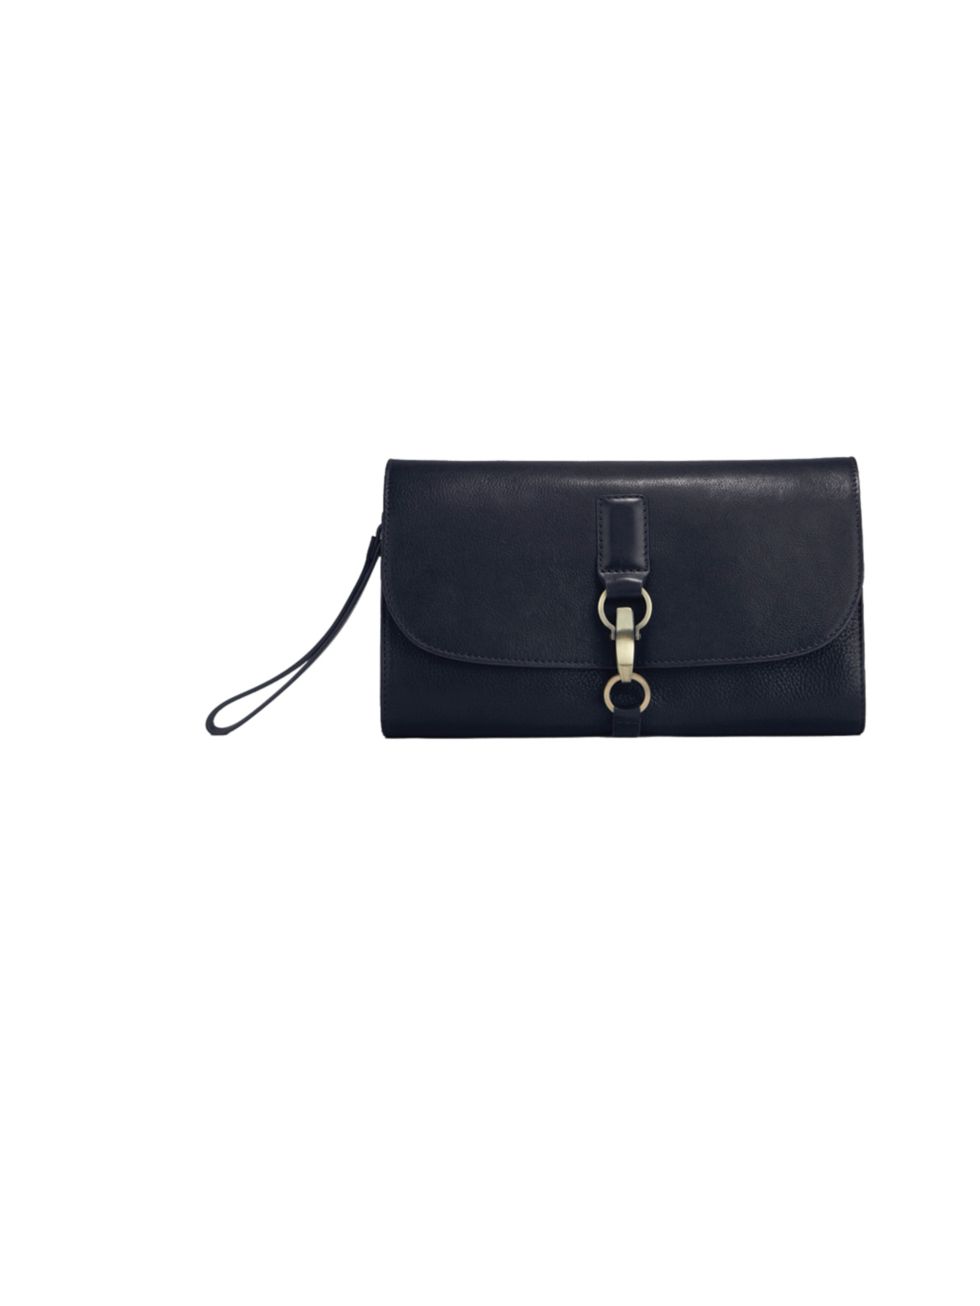 <p>Heard about the new collaboration the fashion pack are loving? Its Radley, but not as you know it... Laura Bailey for Radley leather clutch bag, £199, at <a href="http://www.radley.co.uk/Product/111024_Aubrey_Laura_Bailey_for_Radley.aspx">Radley</a></